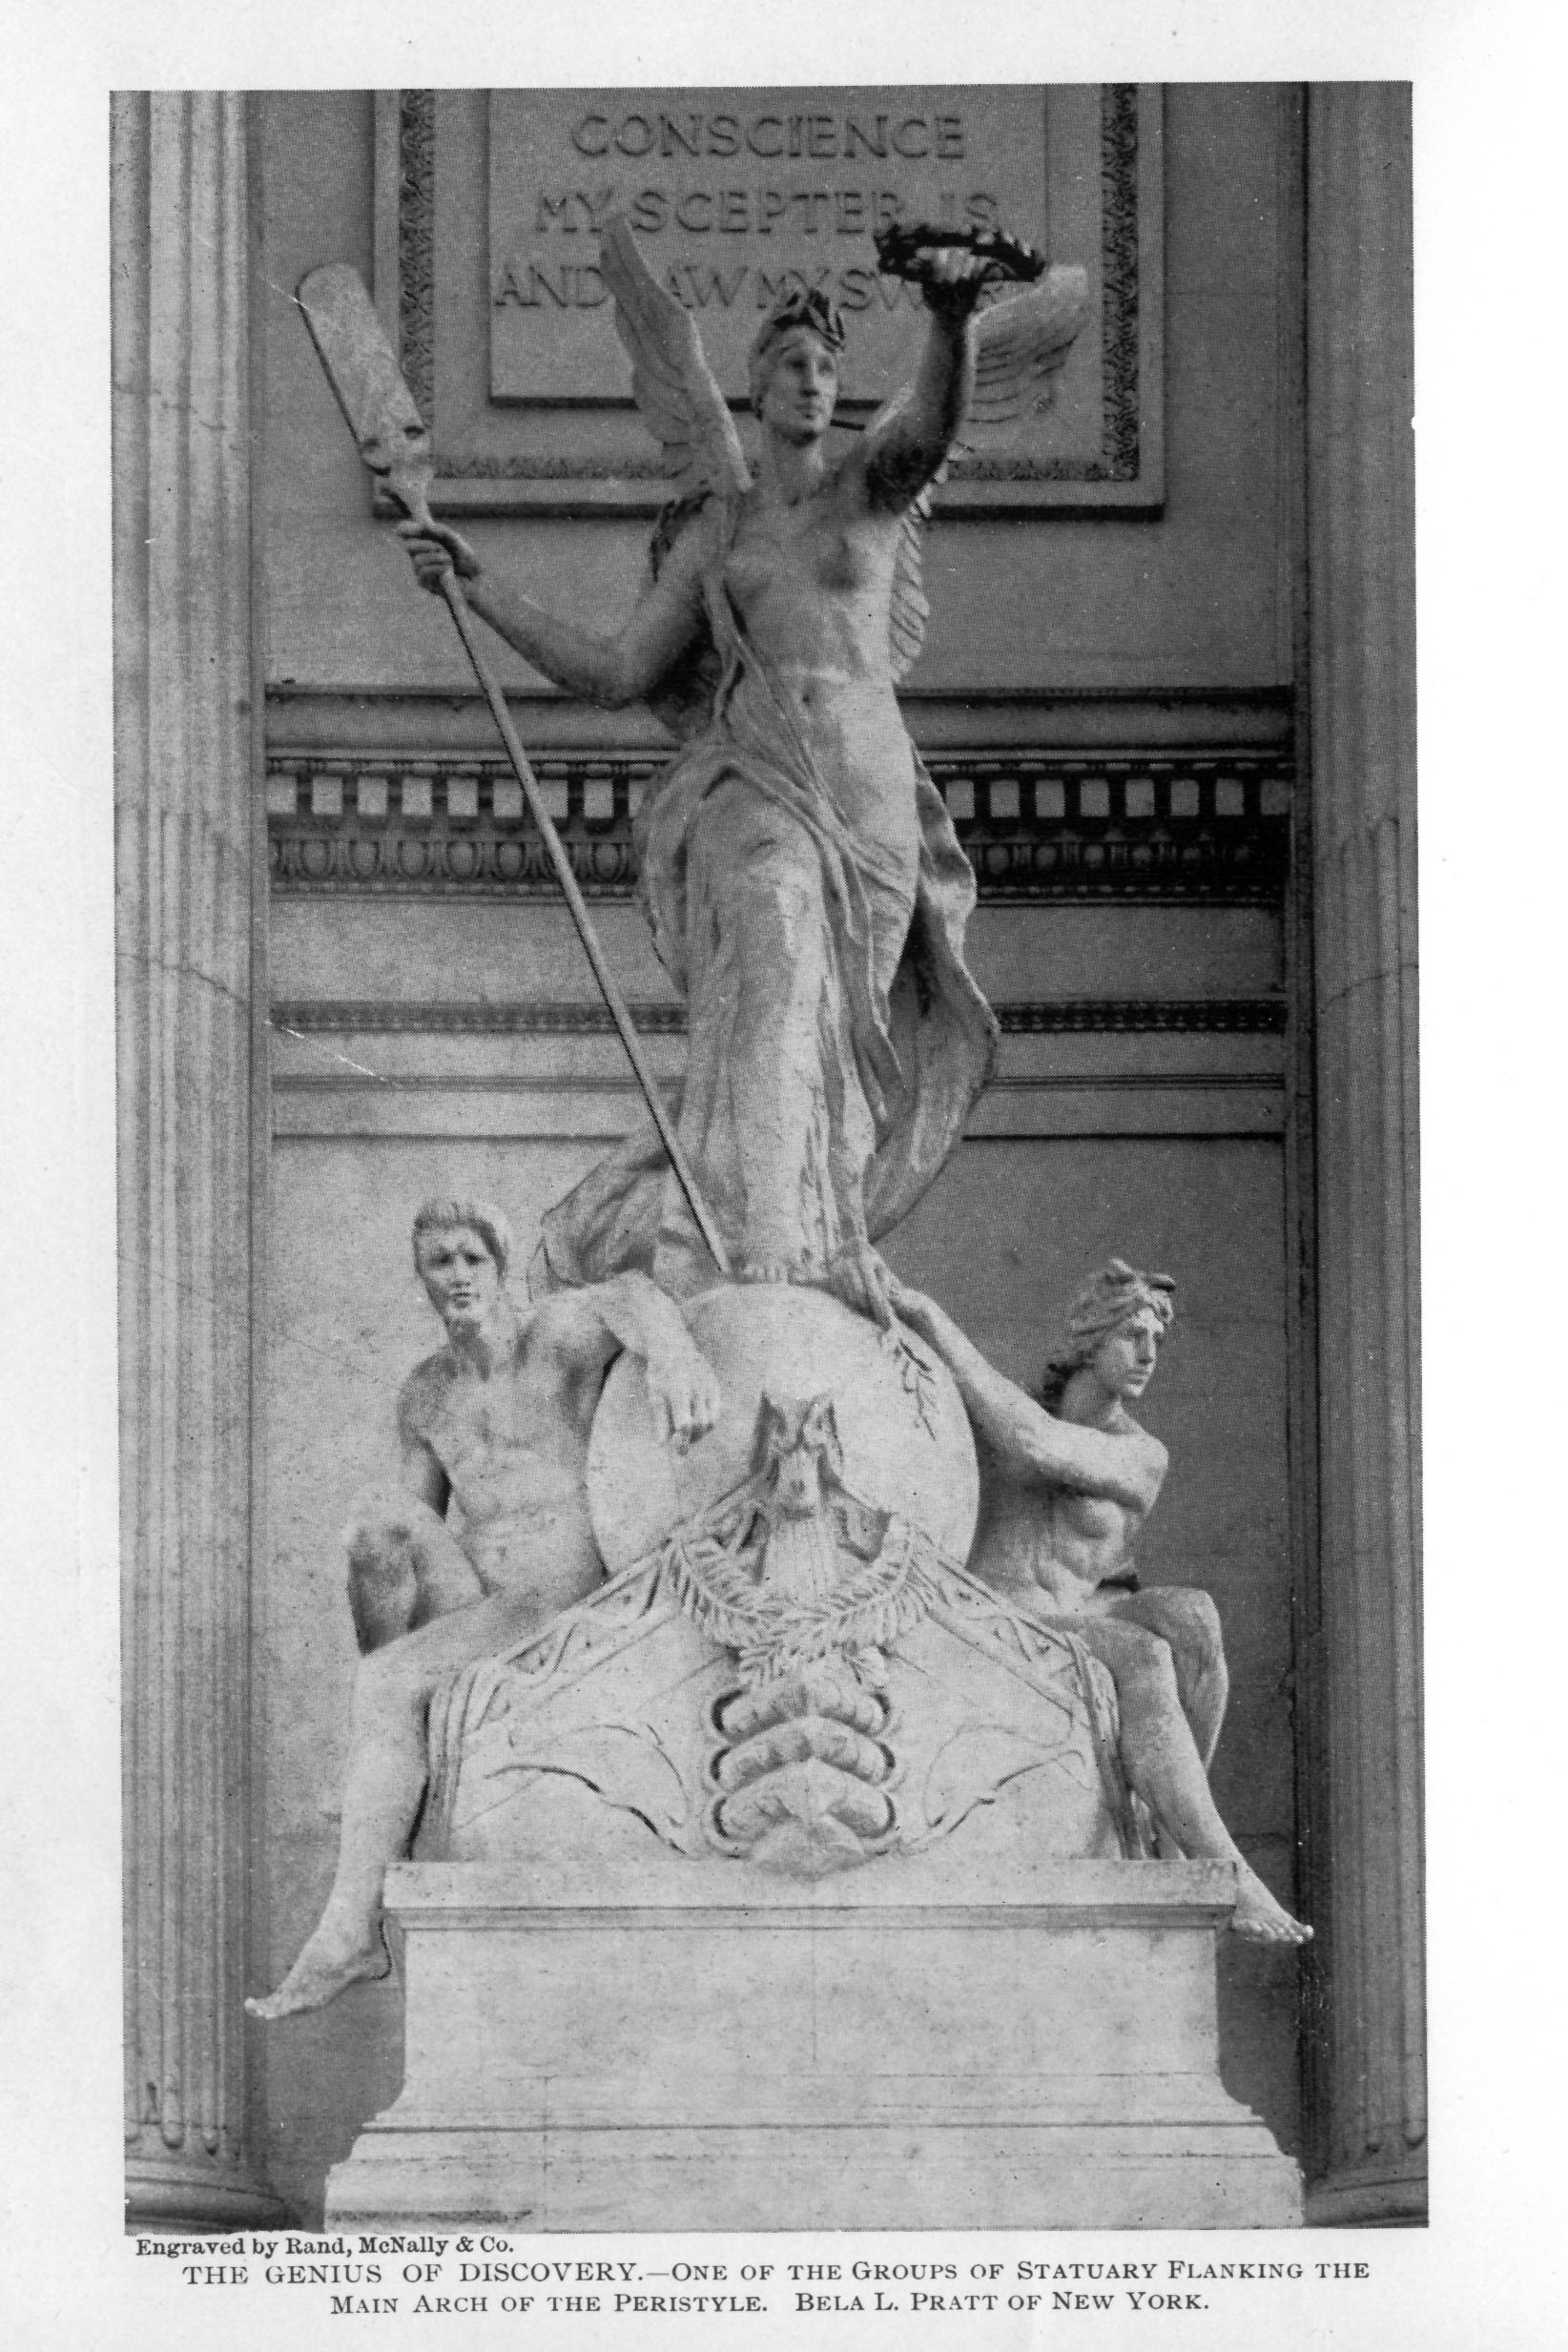 statue of female angel striding forward on a prow with hands outstretched holding laurel wreath and oar, two men sit at her feet